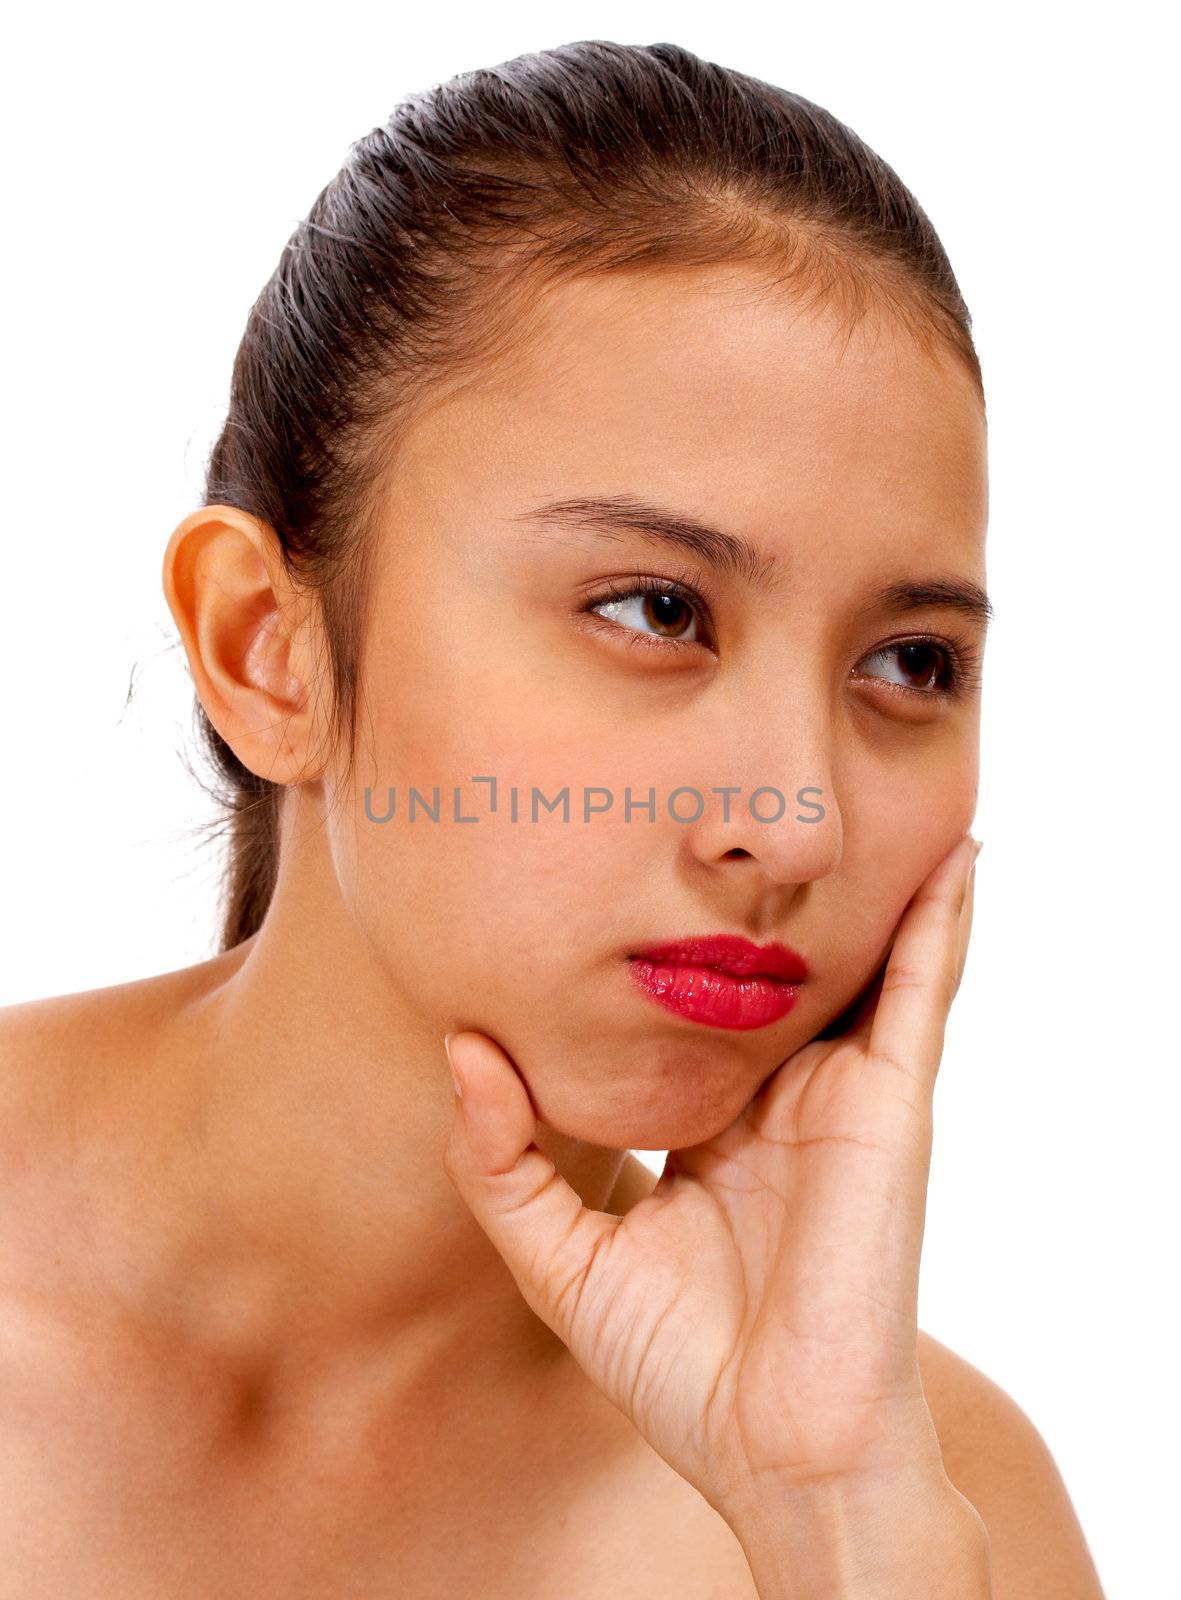 Girl Looking Worried And Unhappy Because Of A Problem